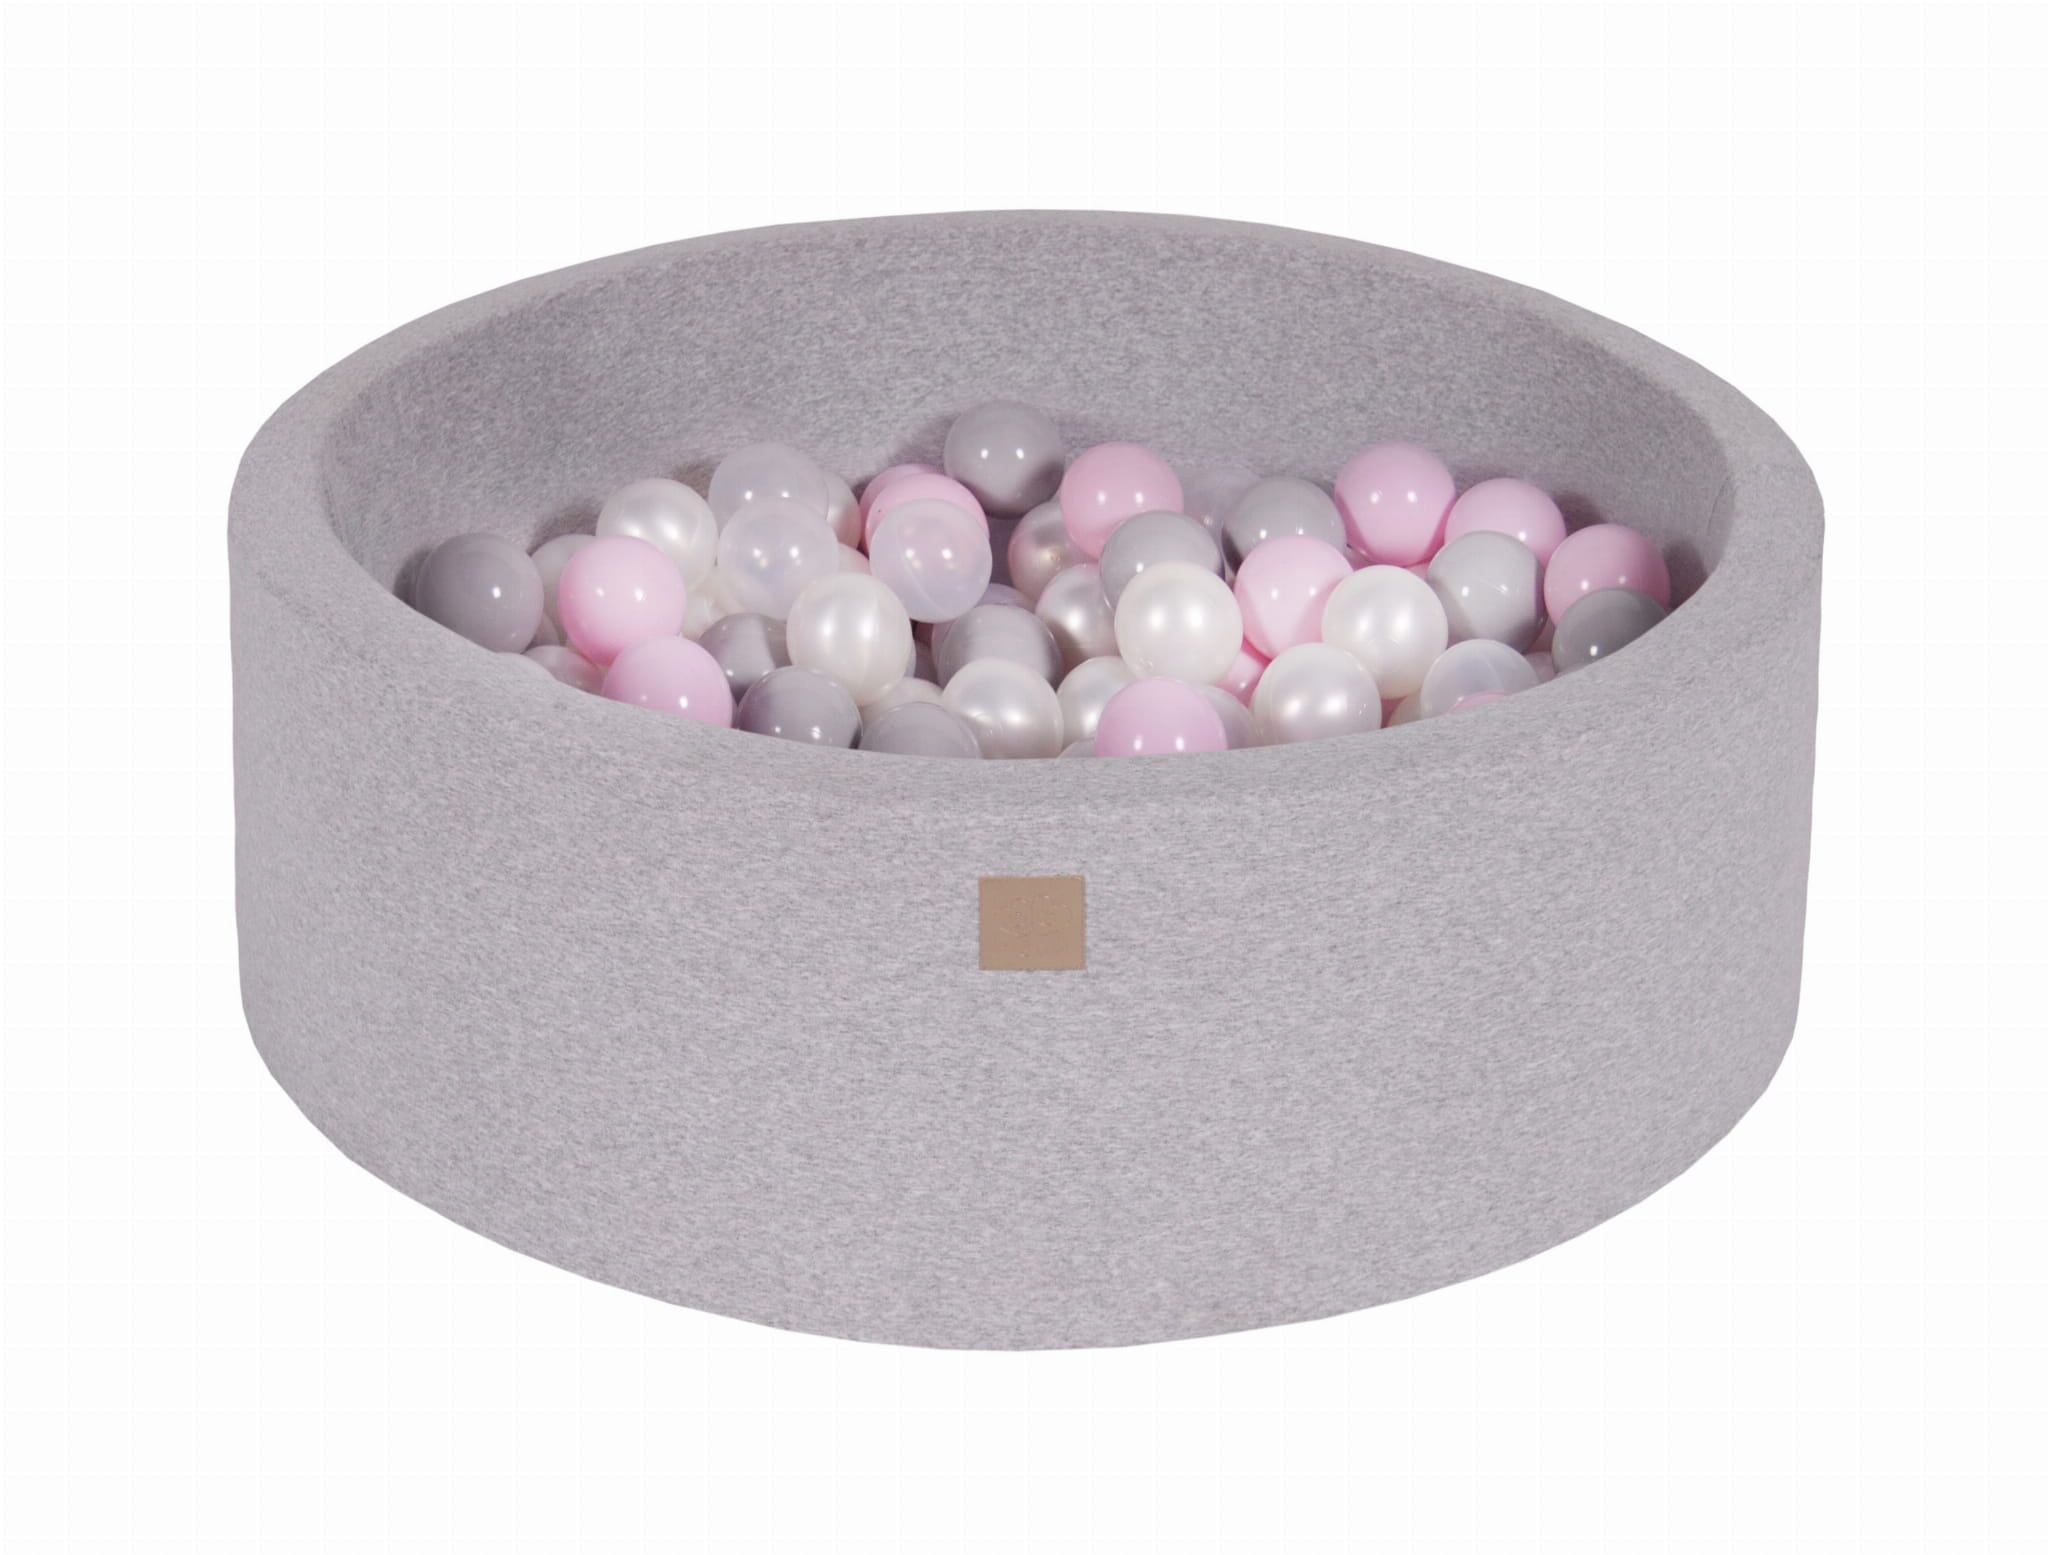 Luxury Cotton Round Ball Pit - Sparkling 'n Warm For Kids By MeowBaby